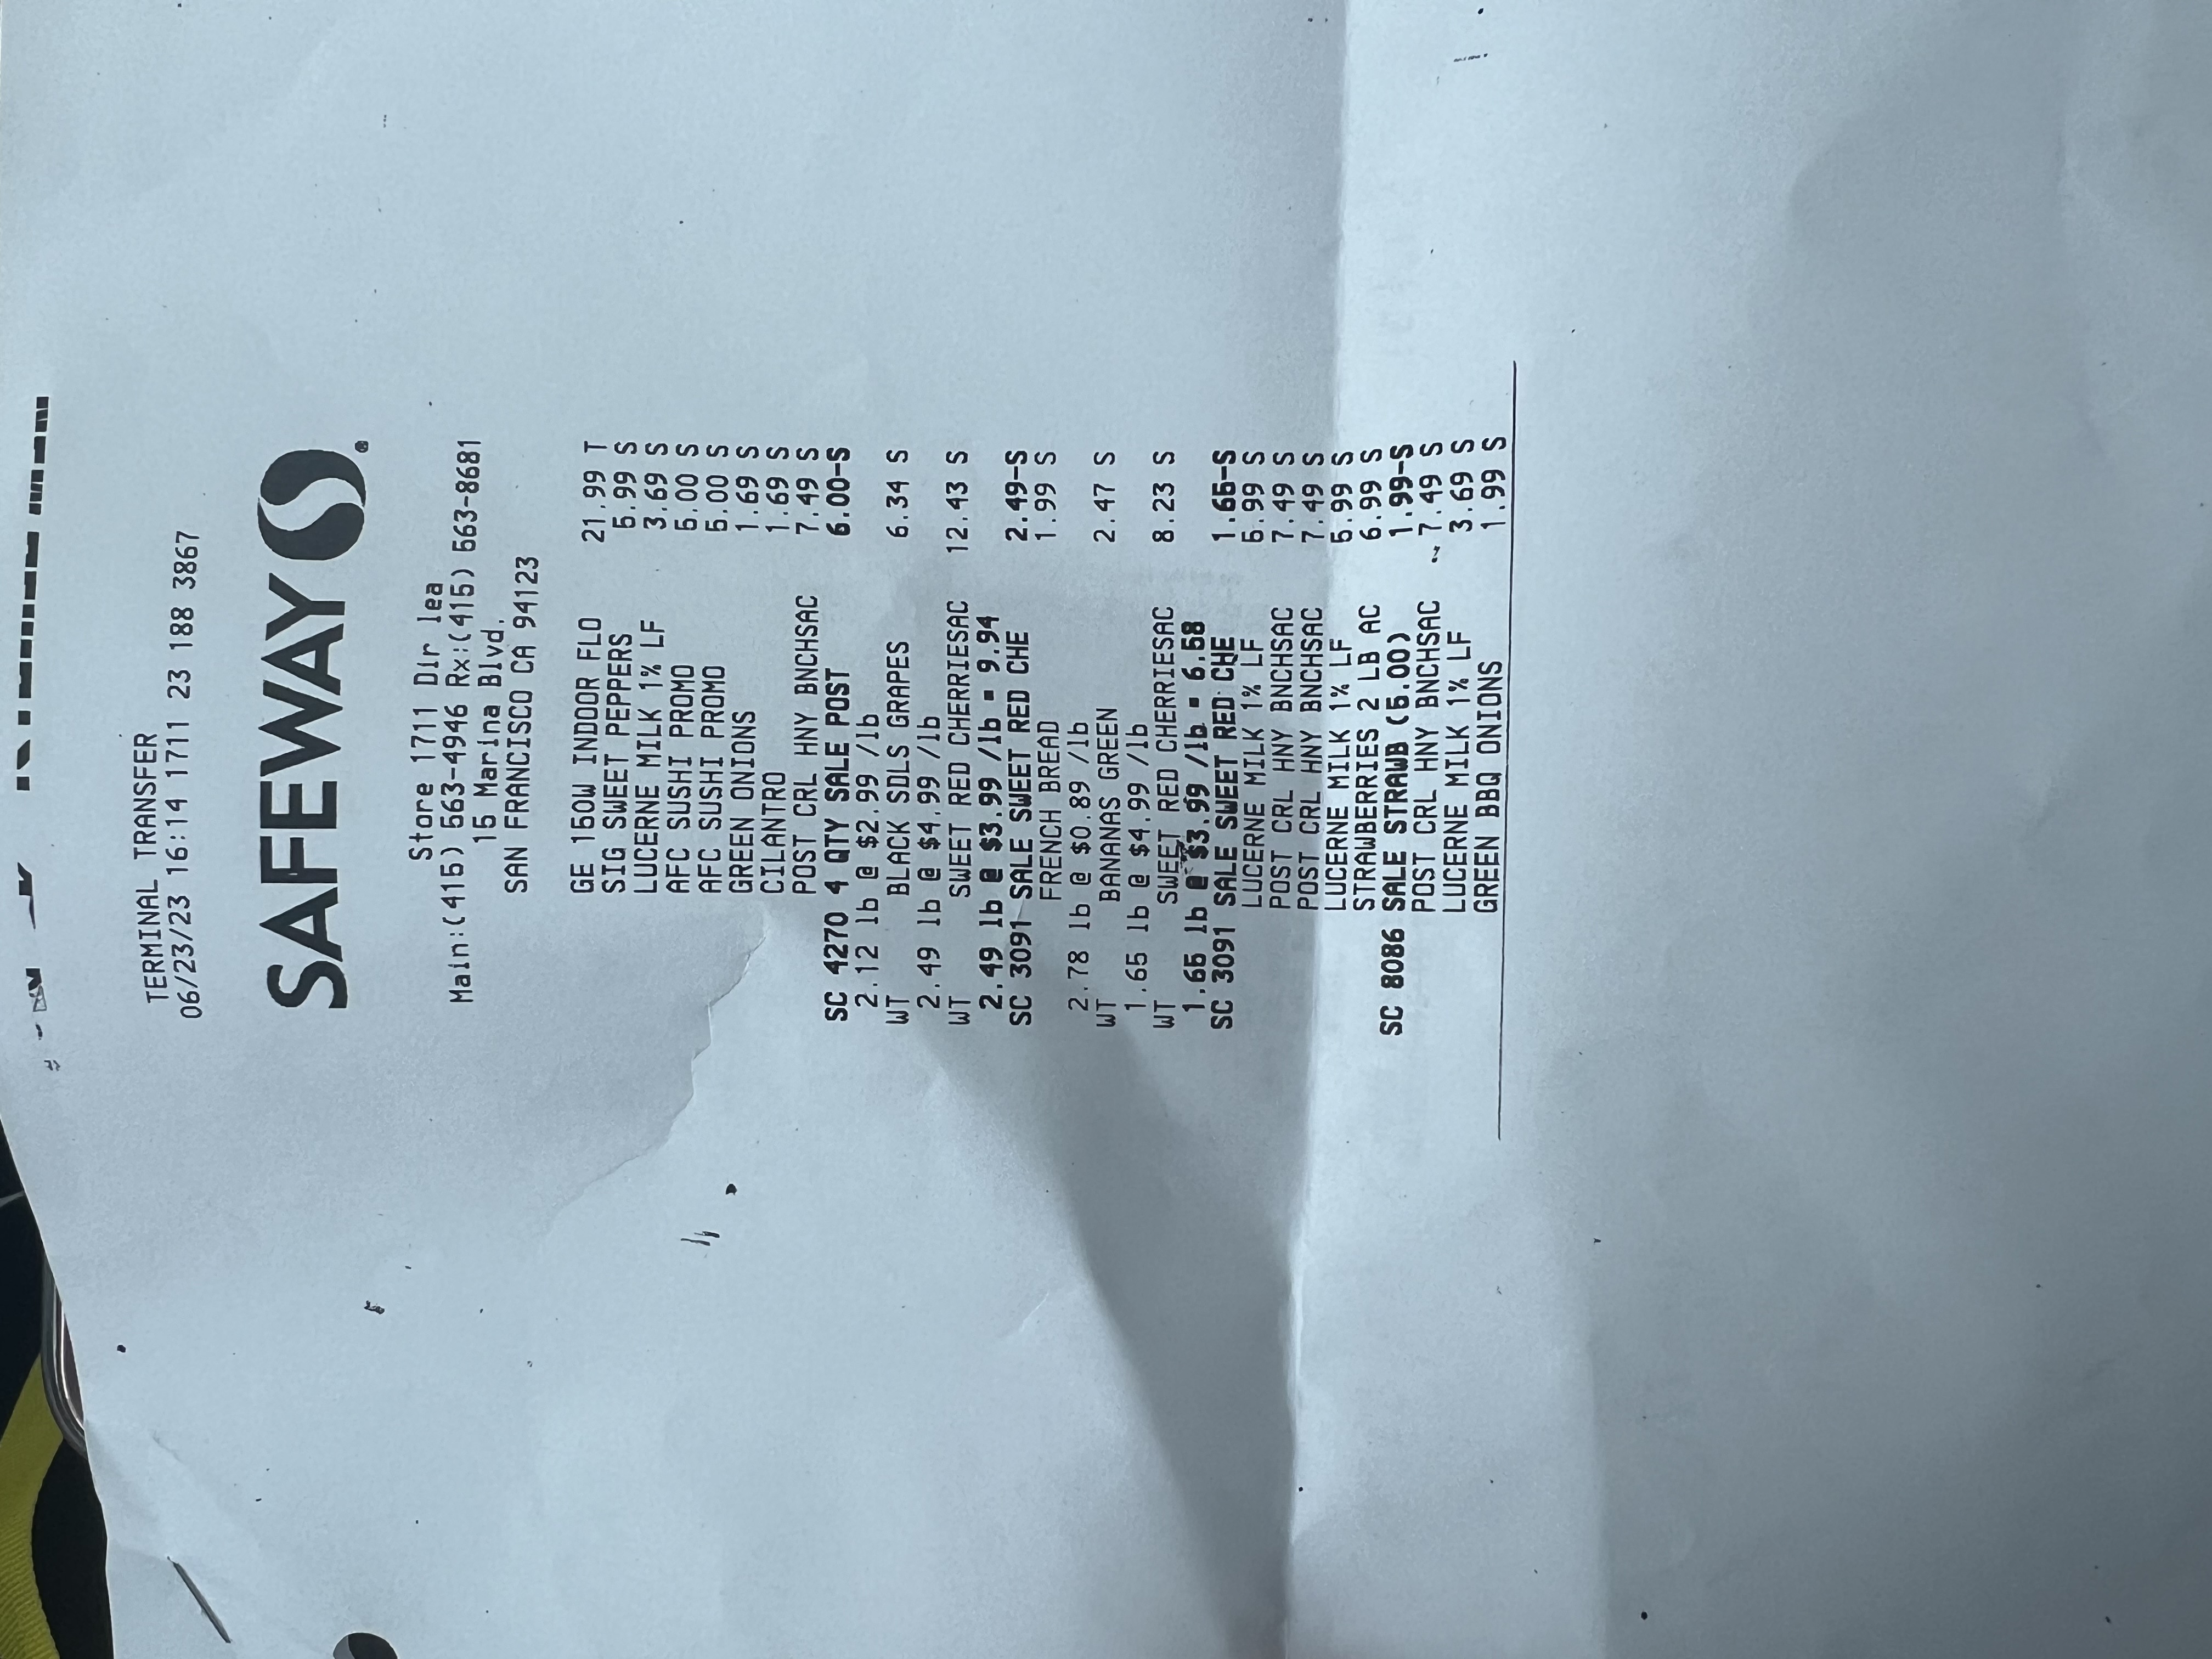 First page of receipt, lamps was on 50% charge 100